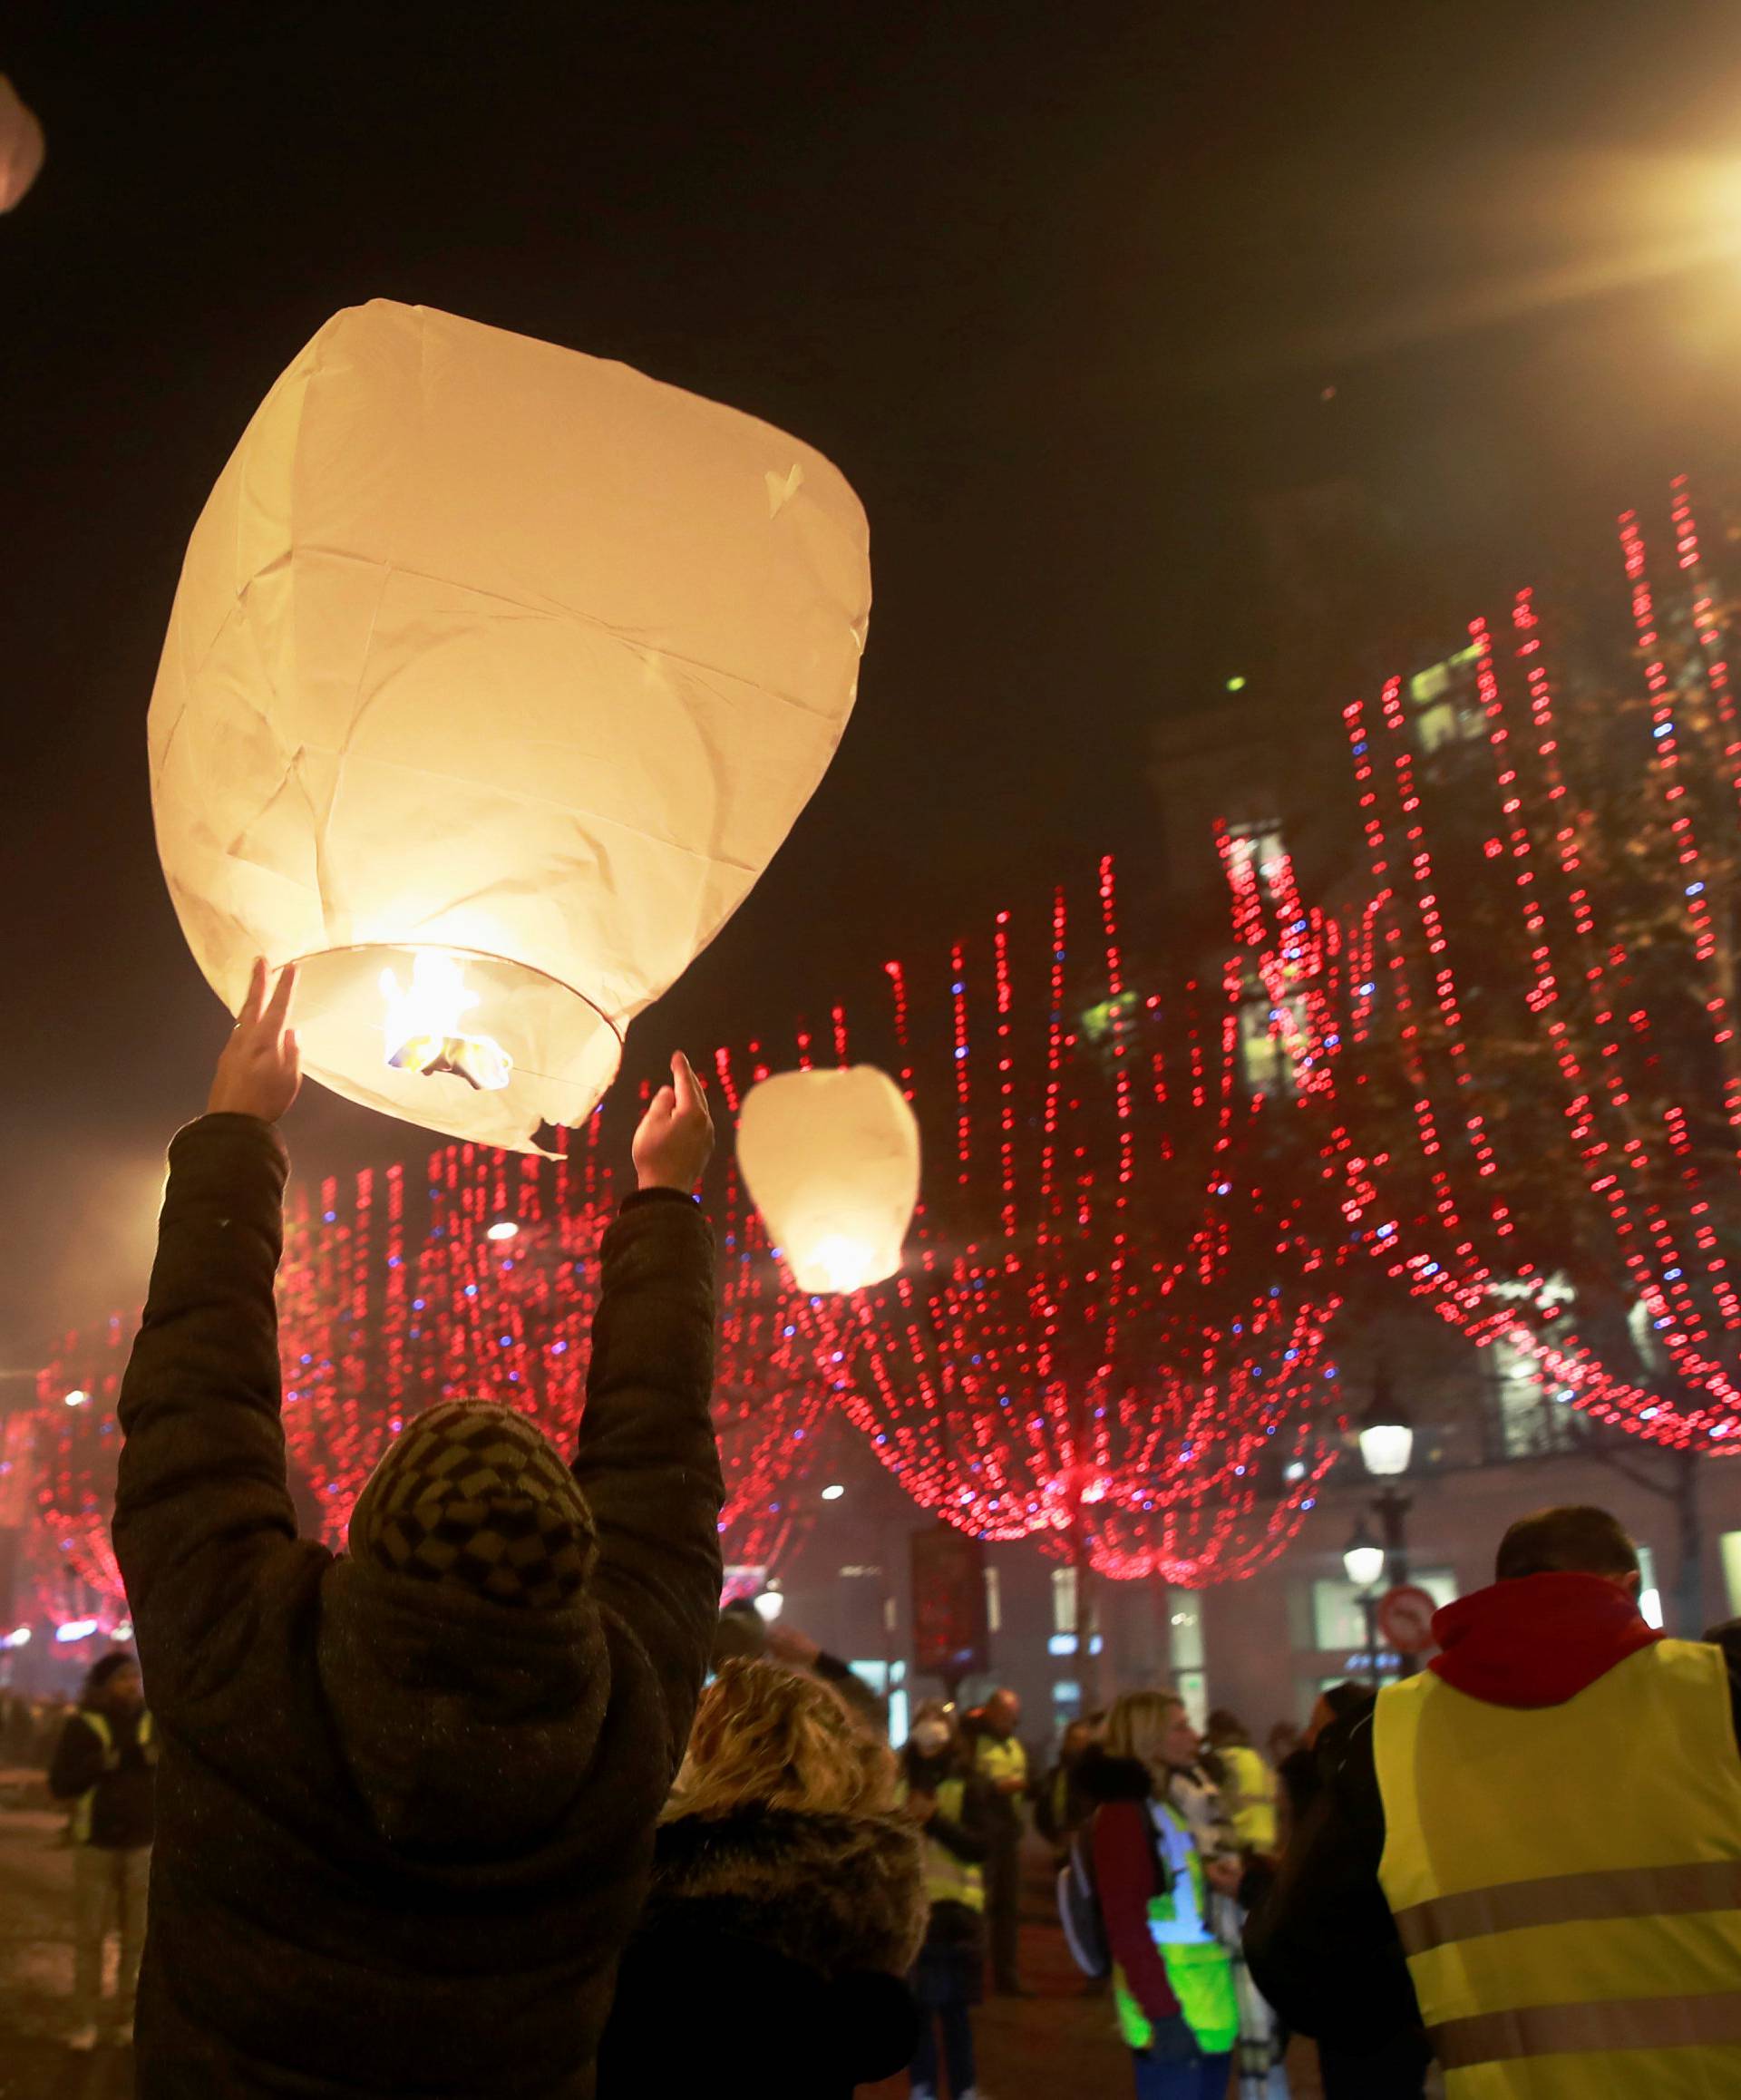 A man releases a paper lantern during a "Yellow vest" protest against higher fuel prices, on the Champs-Elysees in Paris